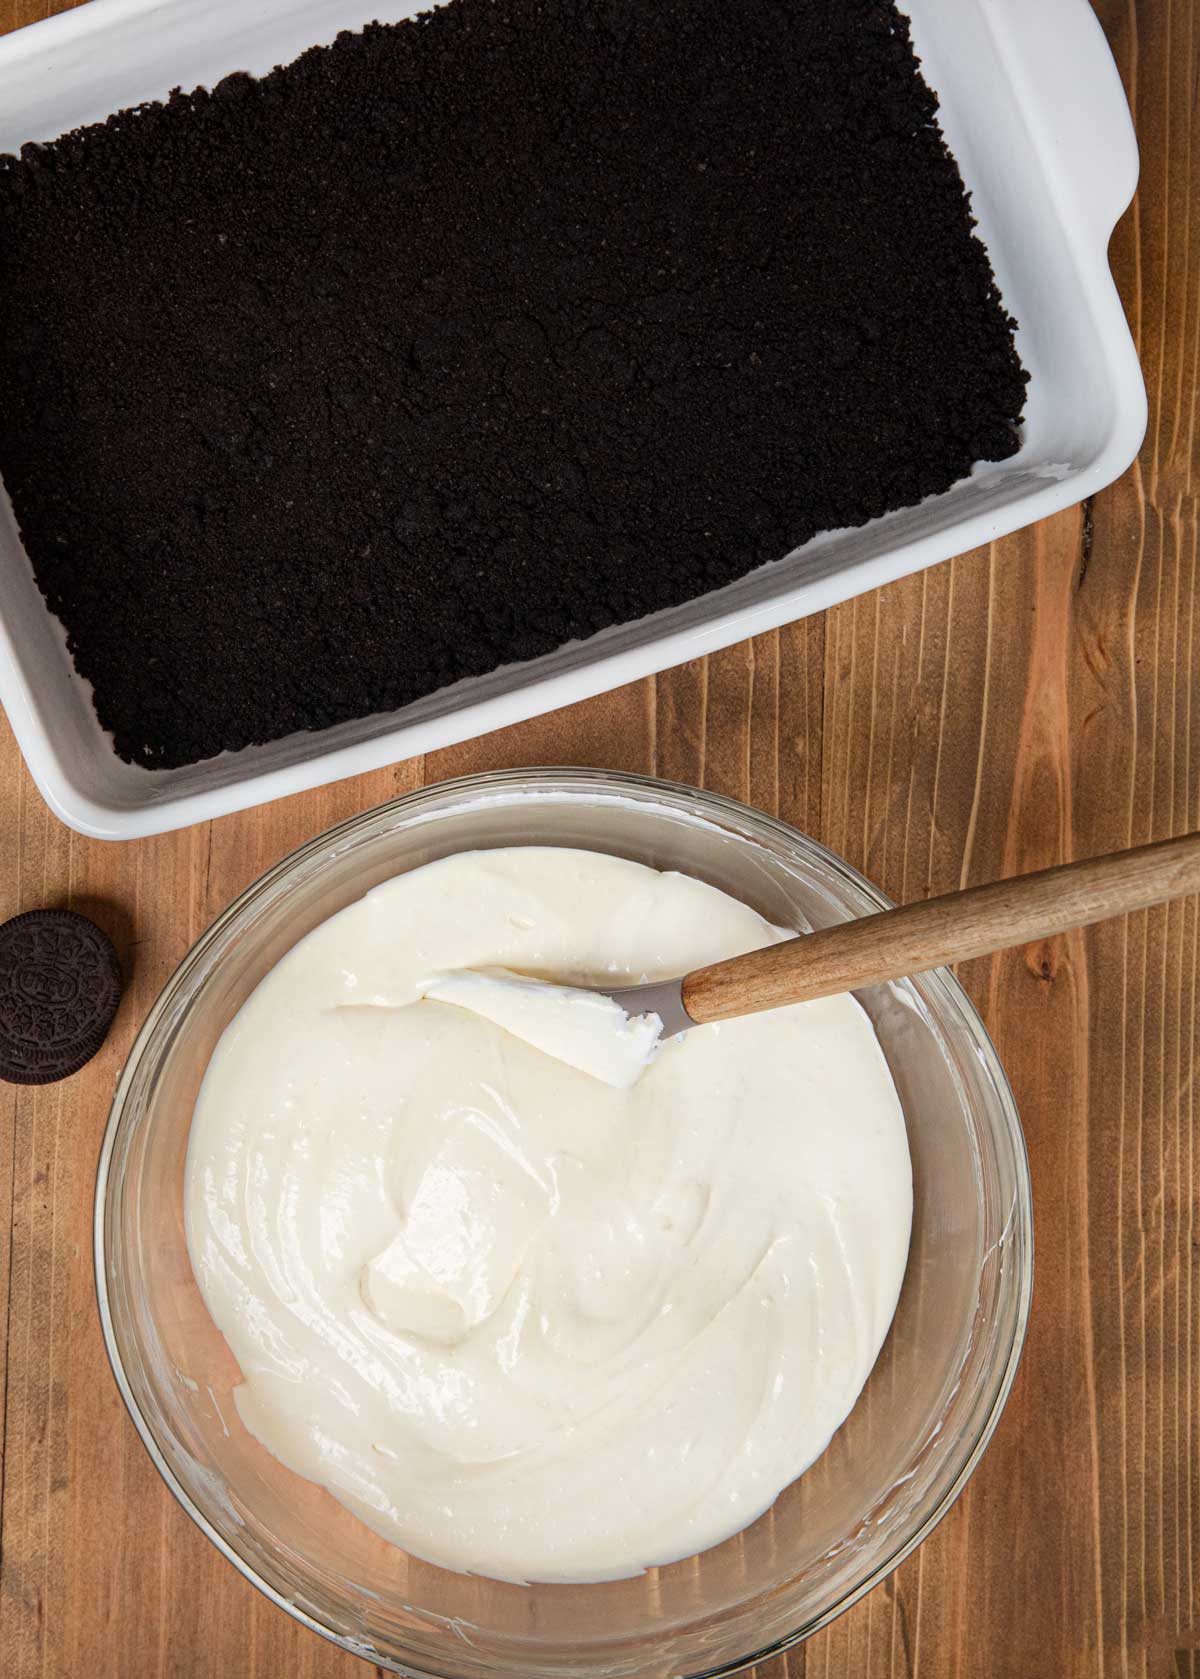 Dirt Cake Oreo crumbs in baking dish with ice cream base in bowl